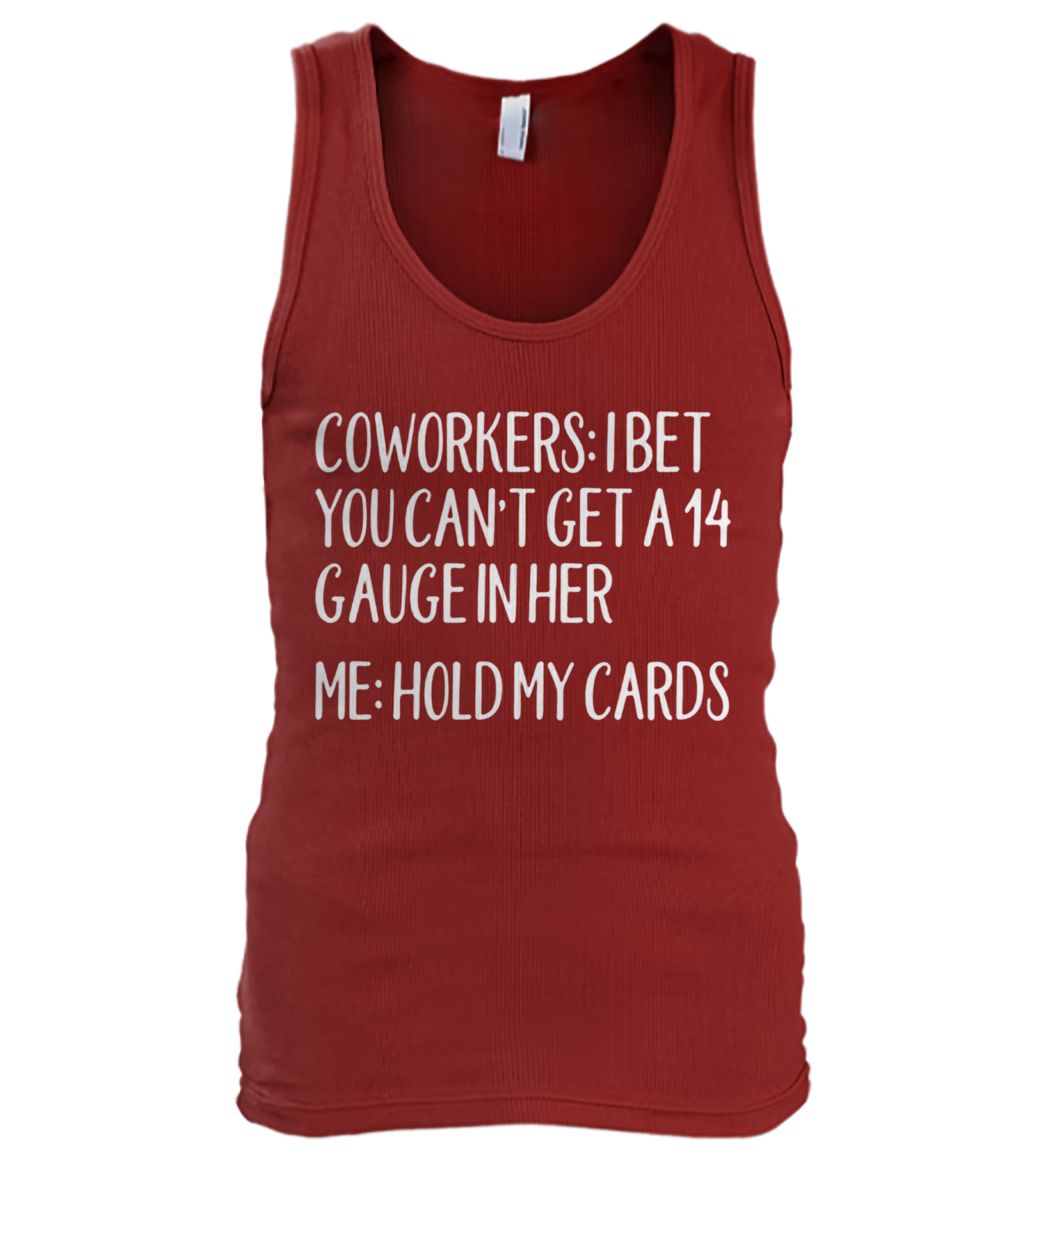 Coworkers I bet you can't get a 14 gauge in her me hold my cards men's tank top